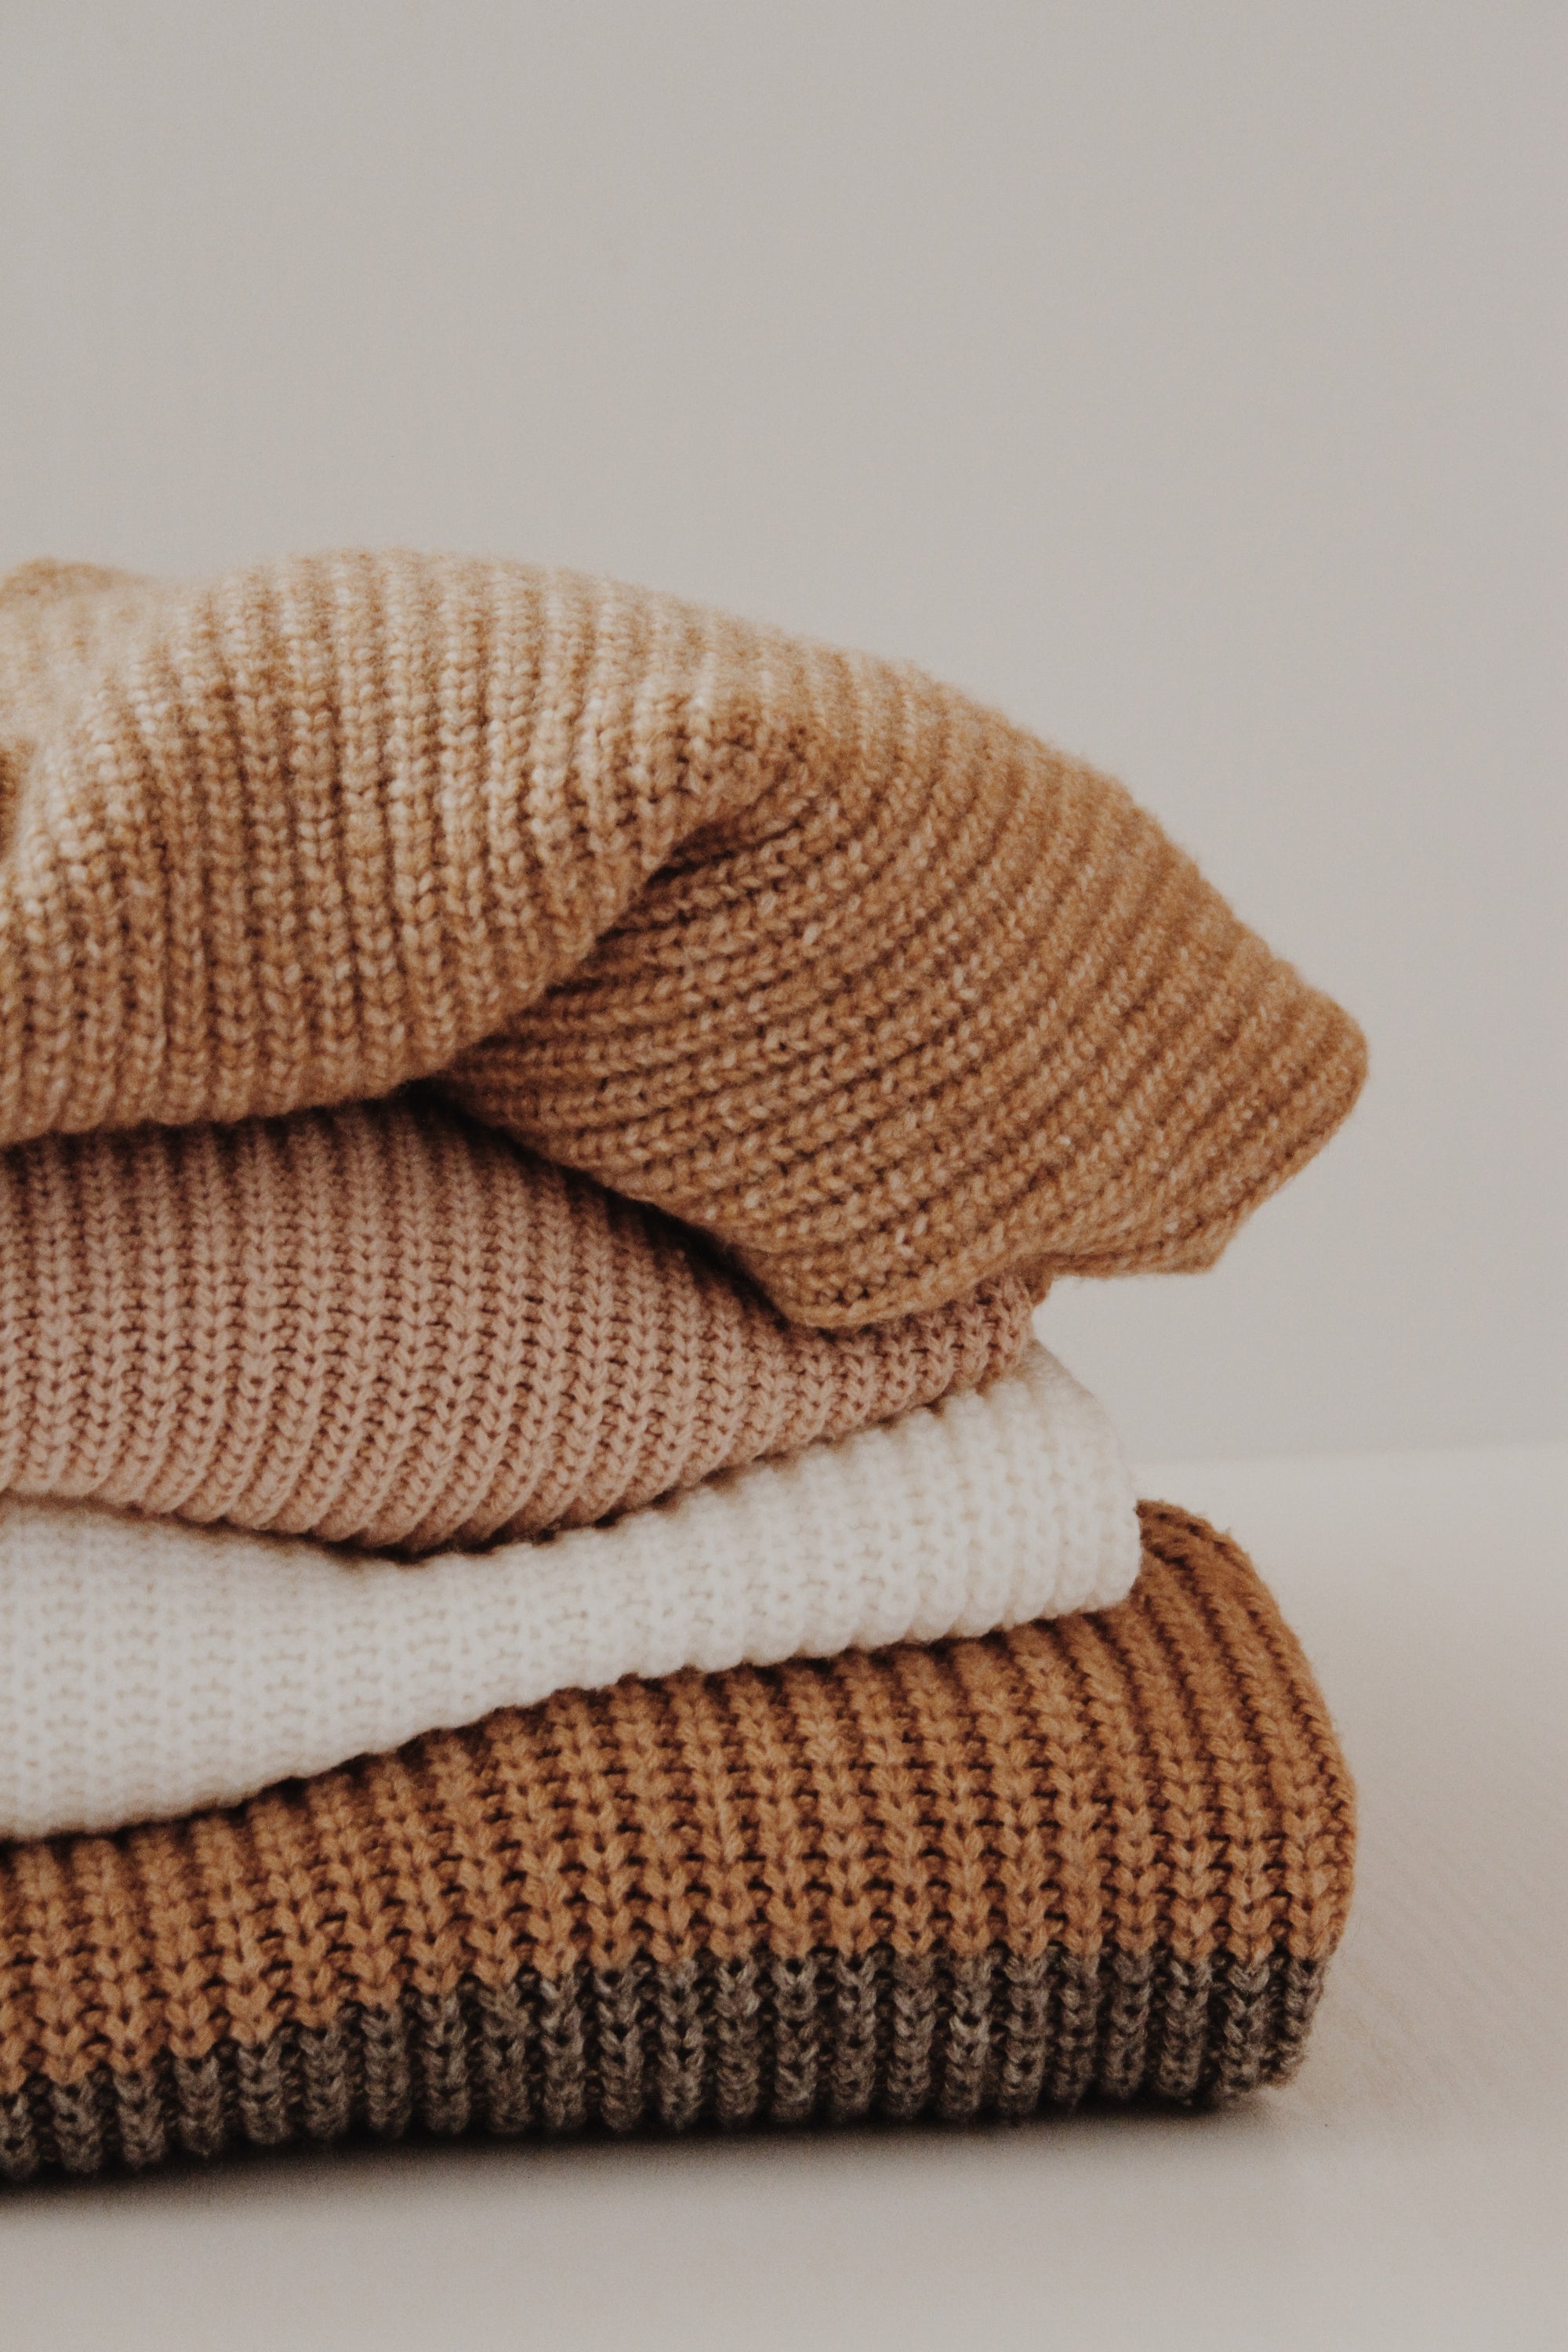 Tips and tricks to keep your favorite sweaters safe from moths